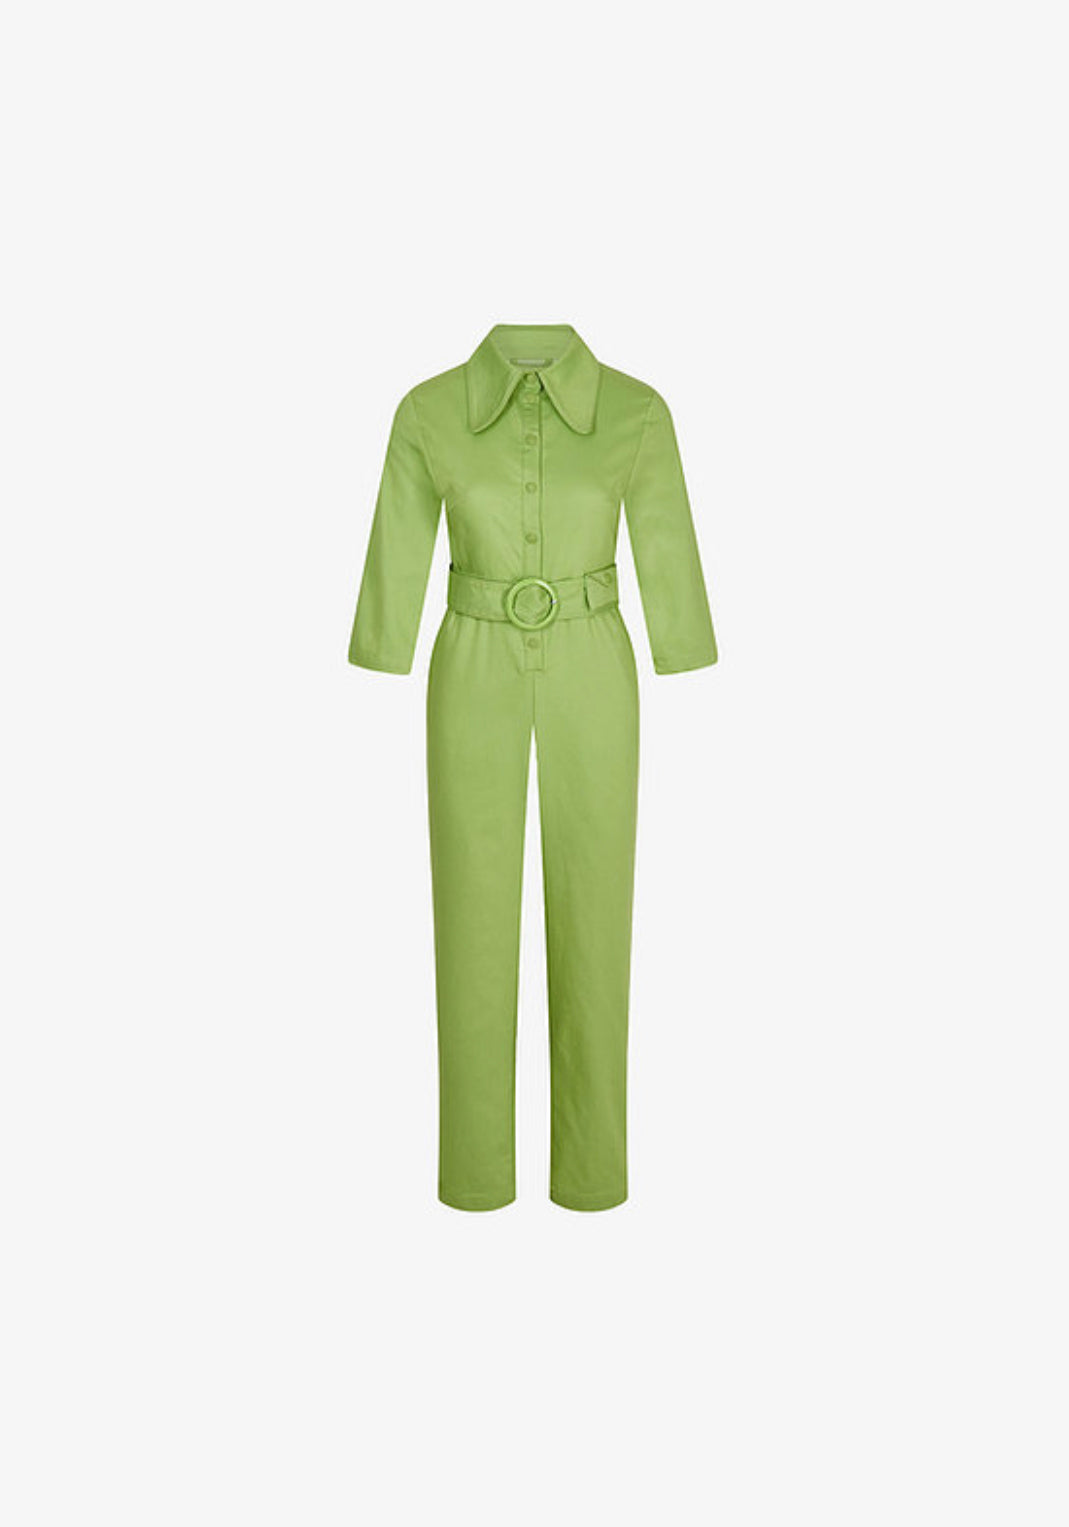 Golden Years Coveralls